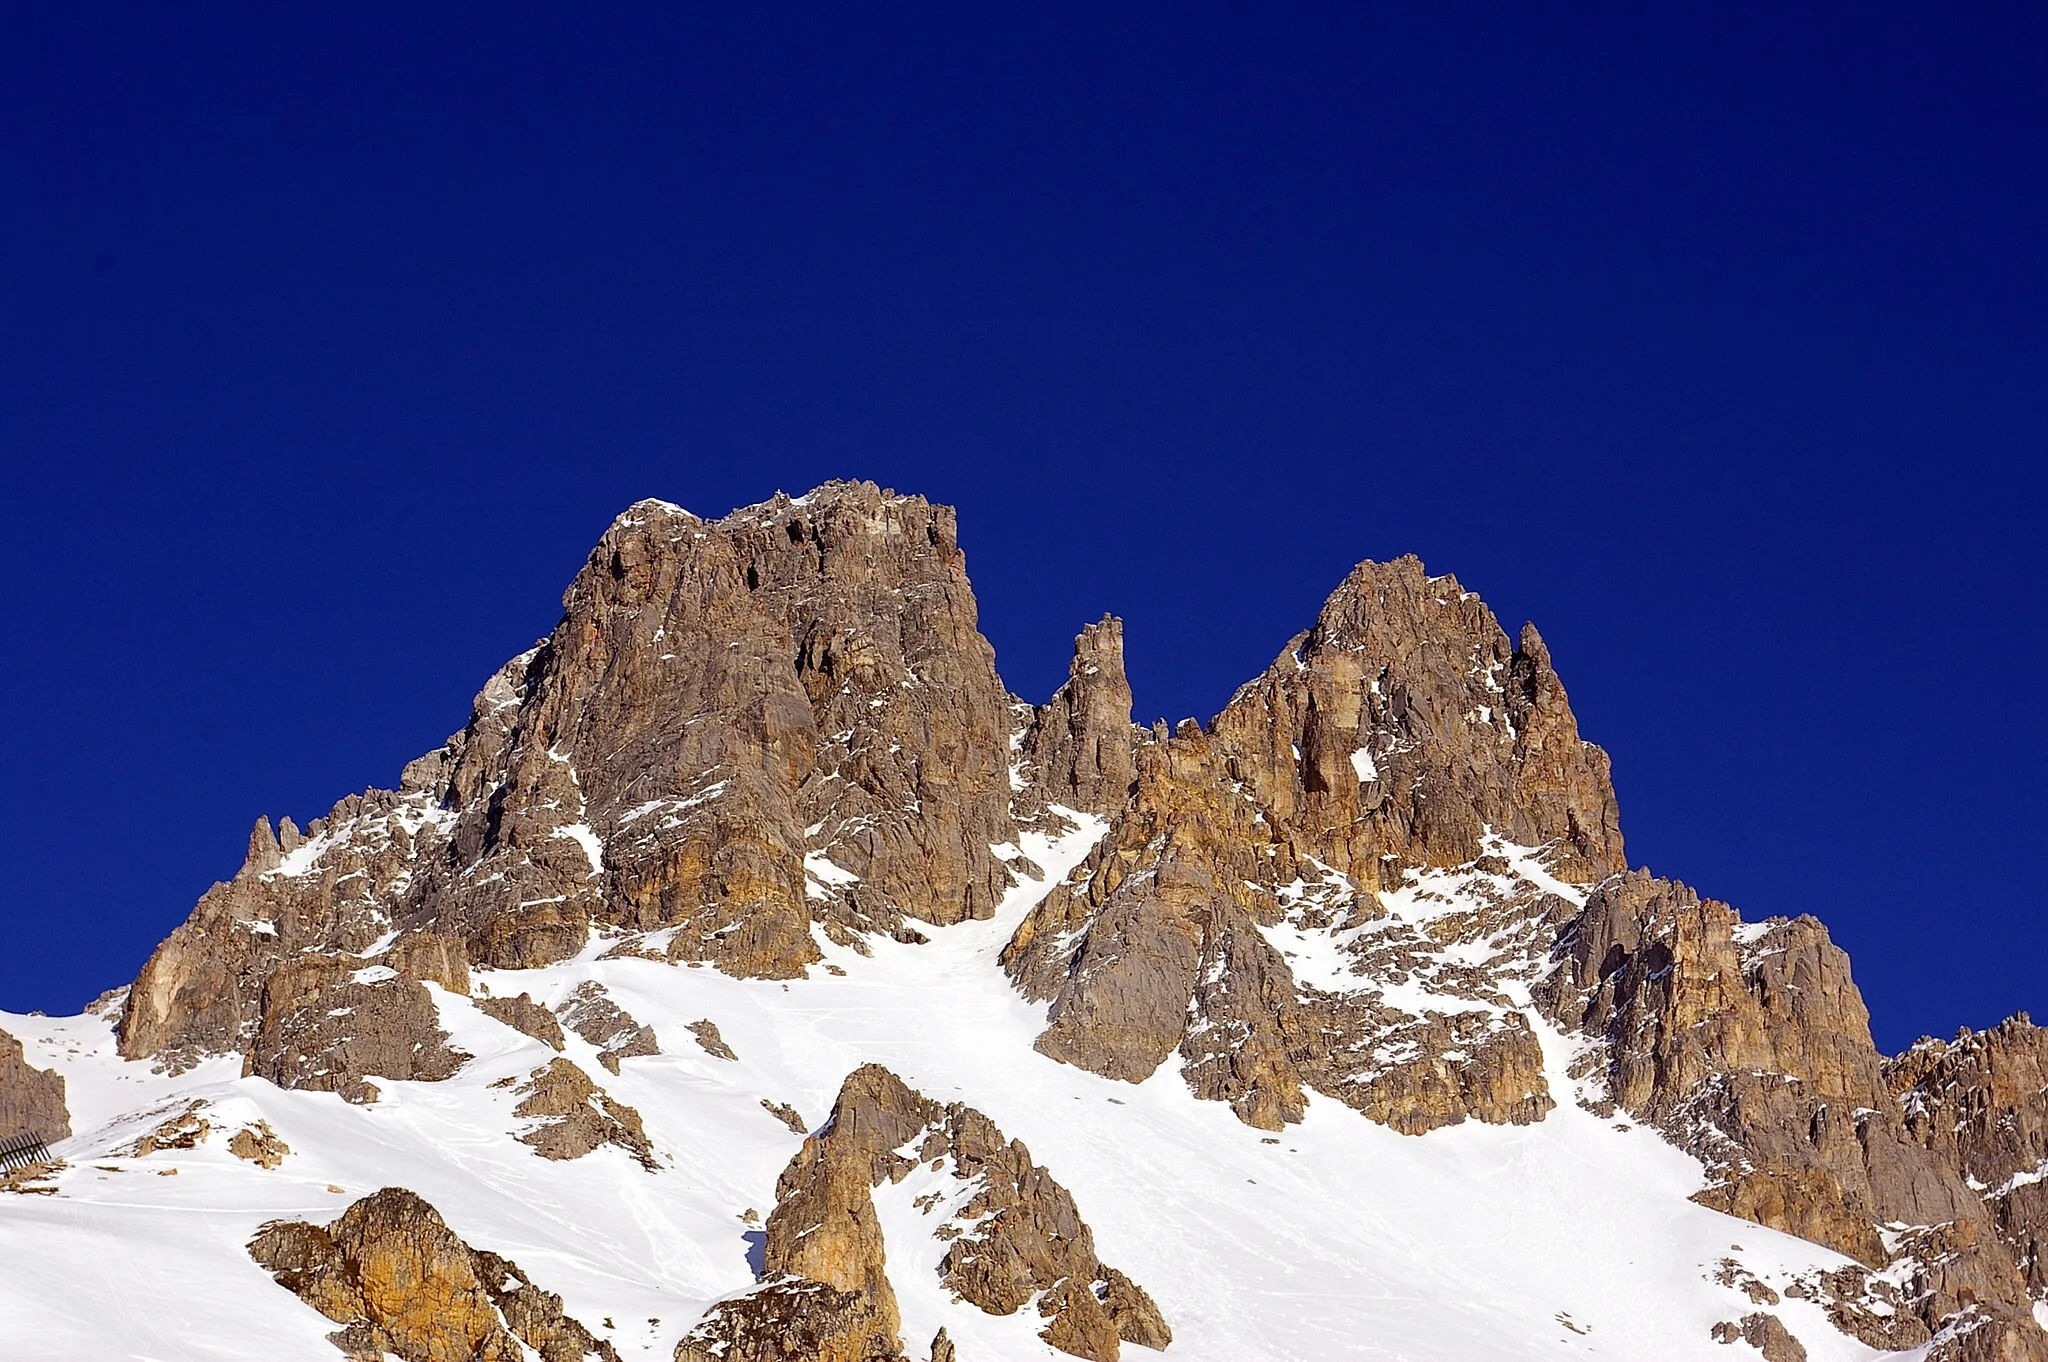 Photo showing: The Dent de Burgin a peak in the skiing domain of Méribel, France.